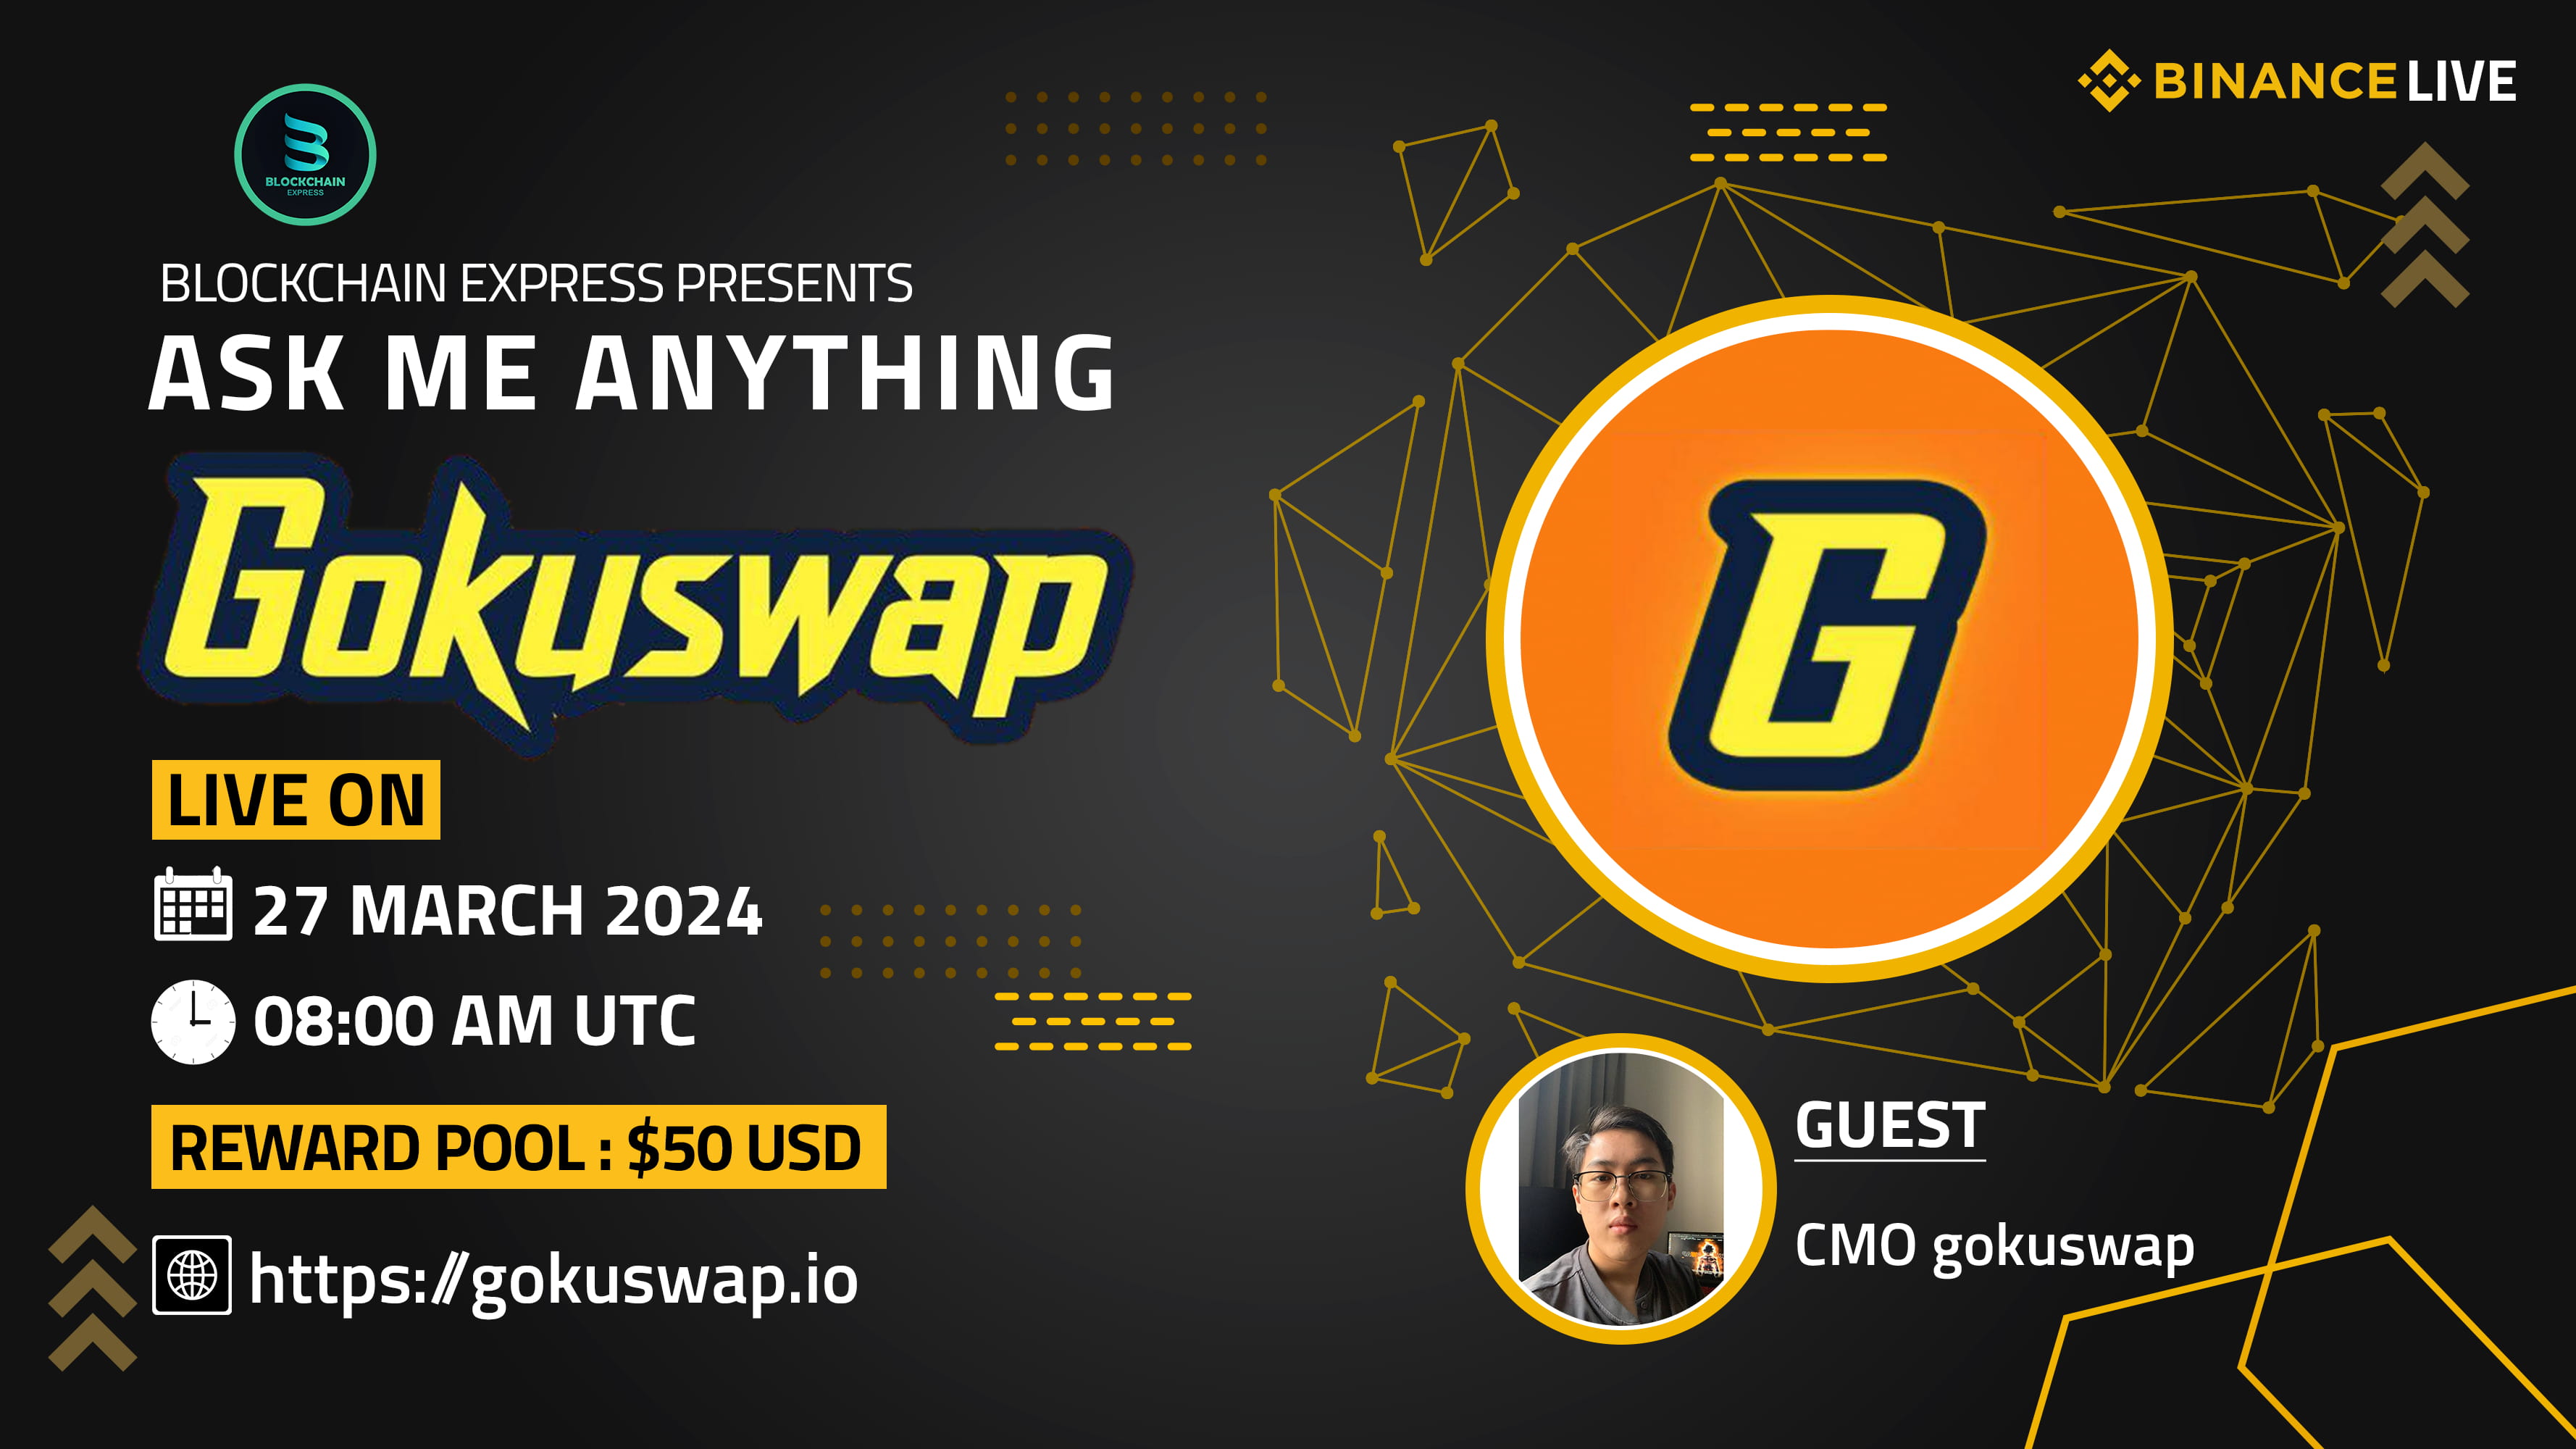 ₿lockchain Express will be hosting an AMA session with" Gokuswap "